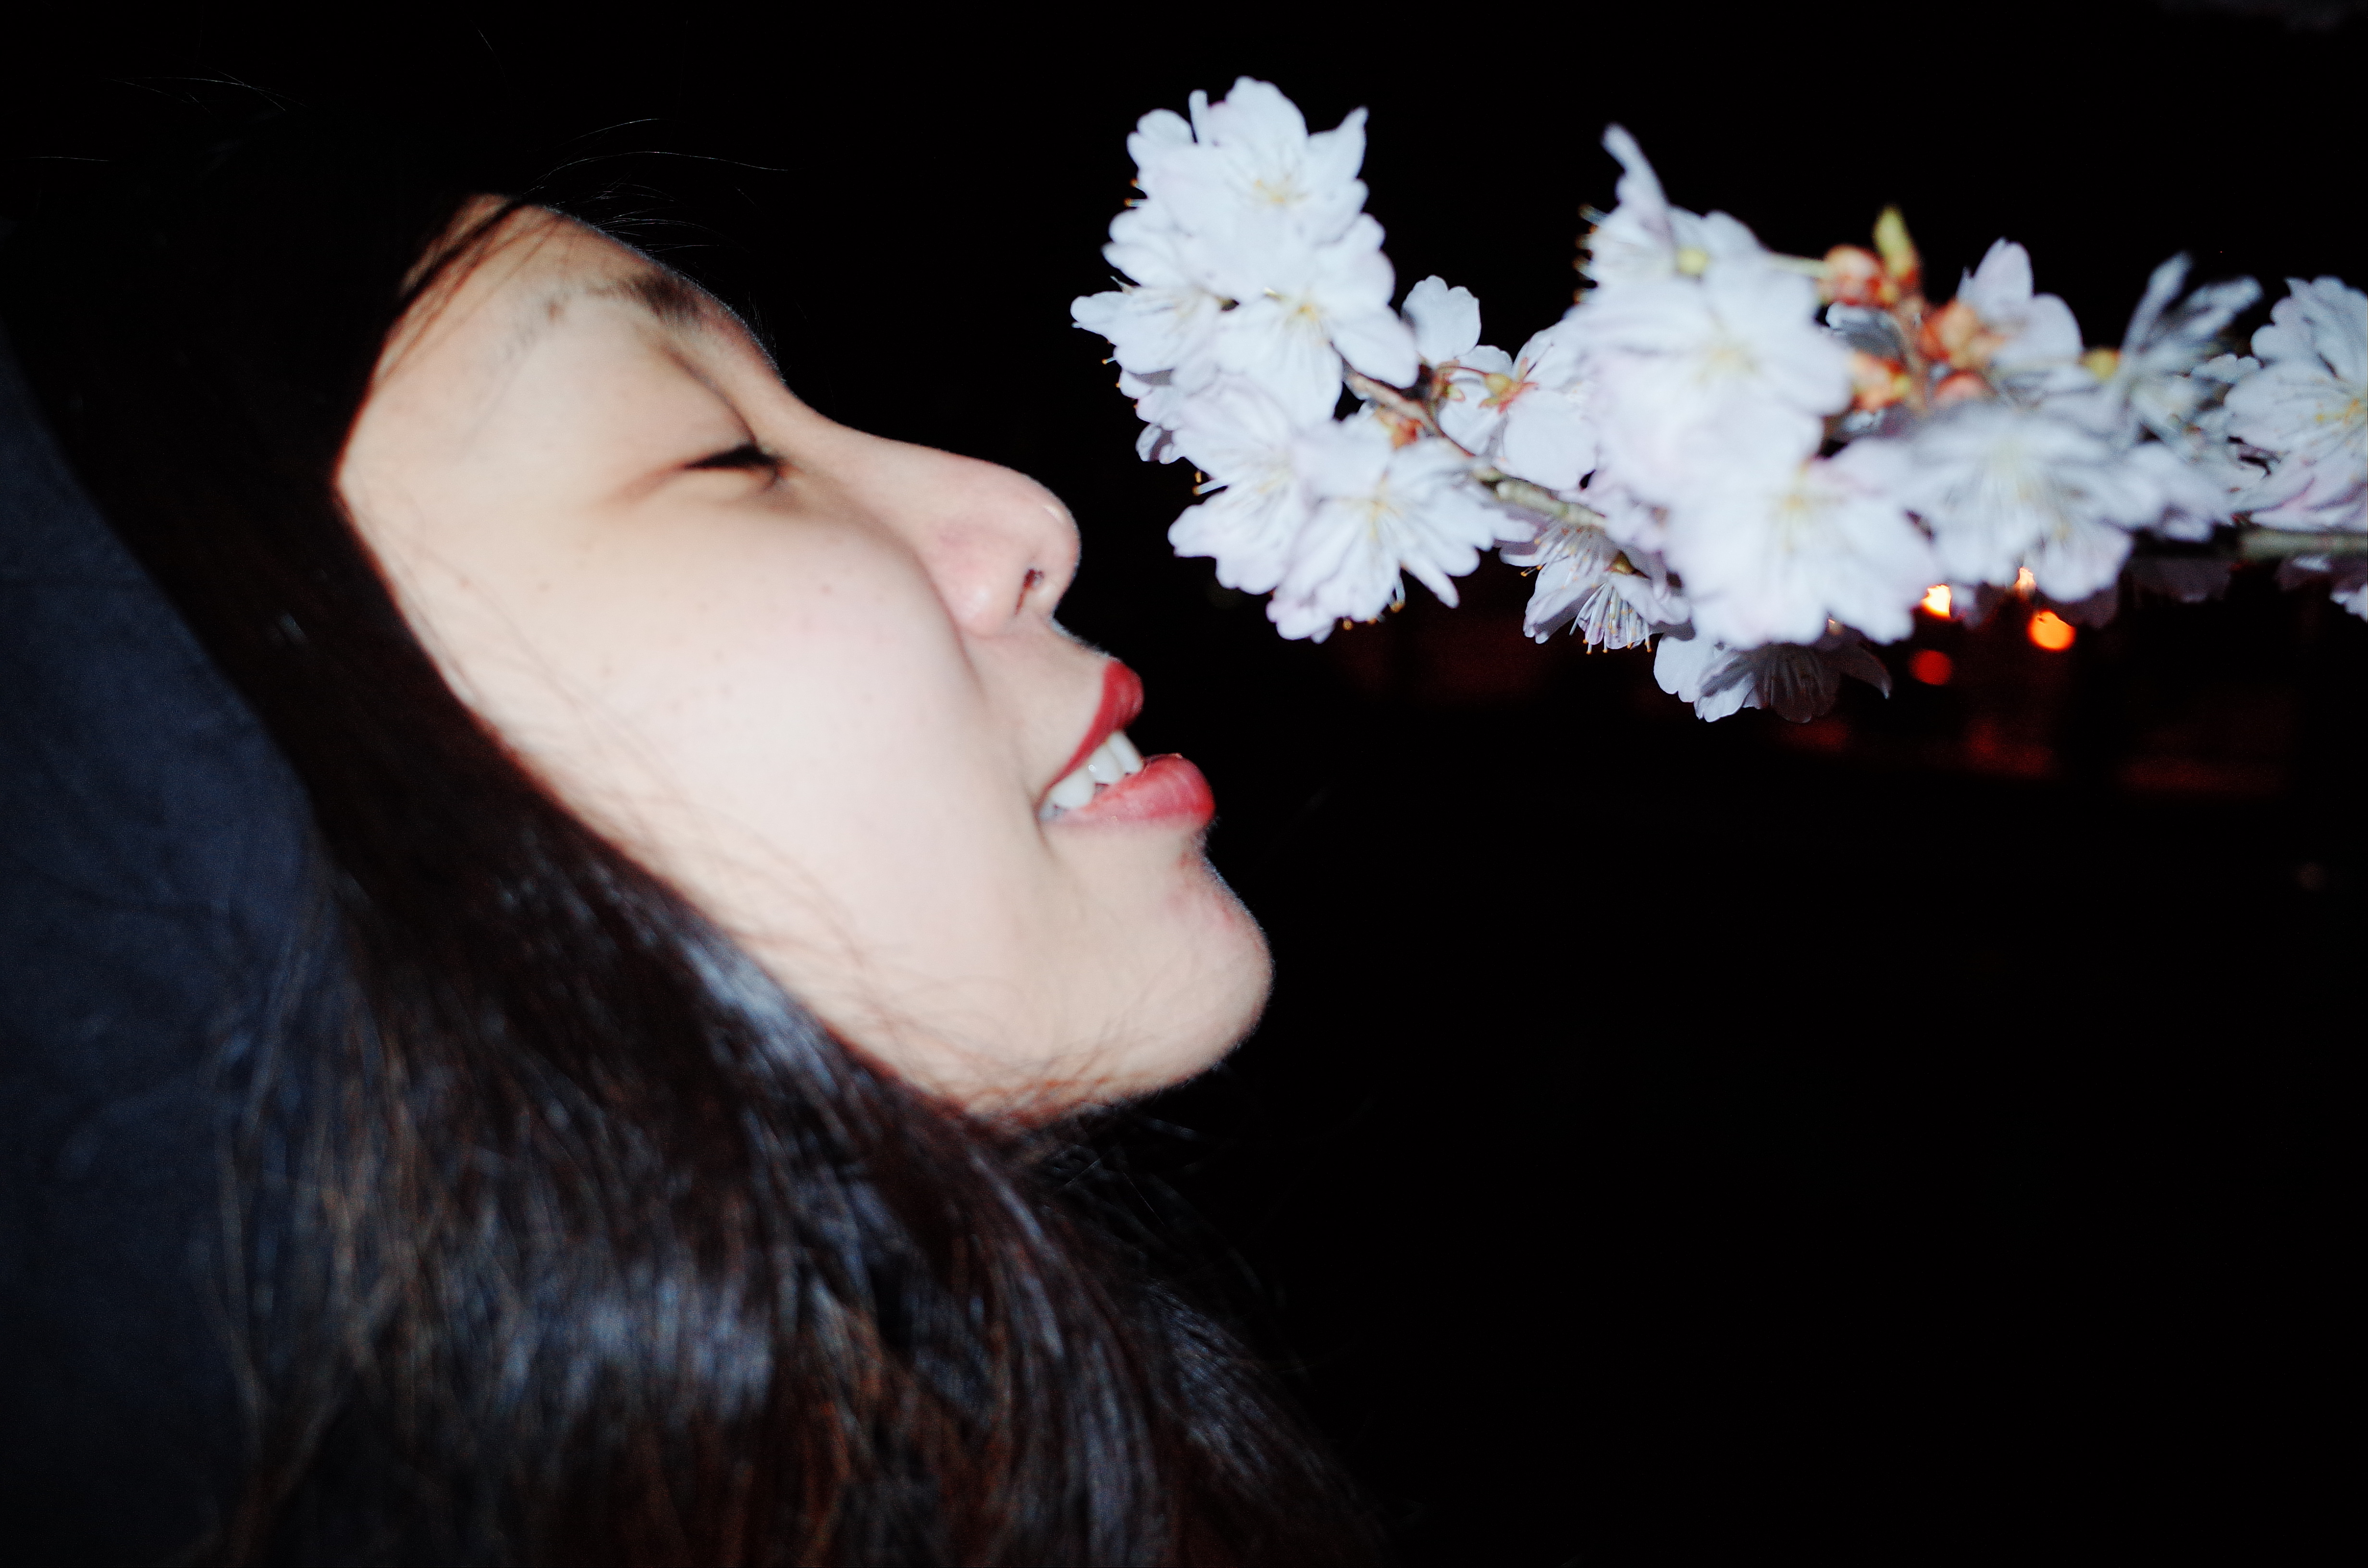 Cindy sniffing cherry blossoms. Uji / Kyoto, 2018